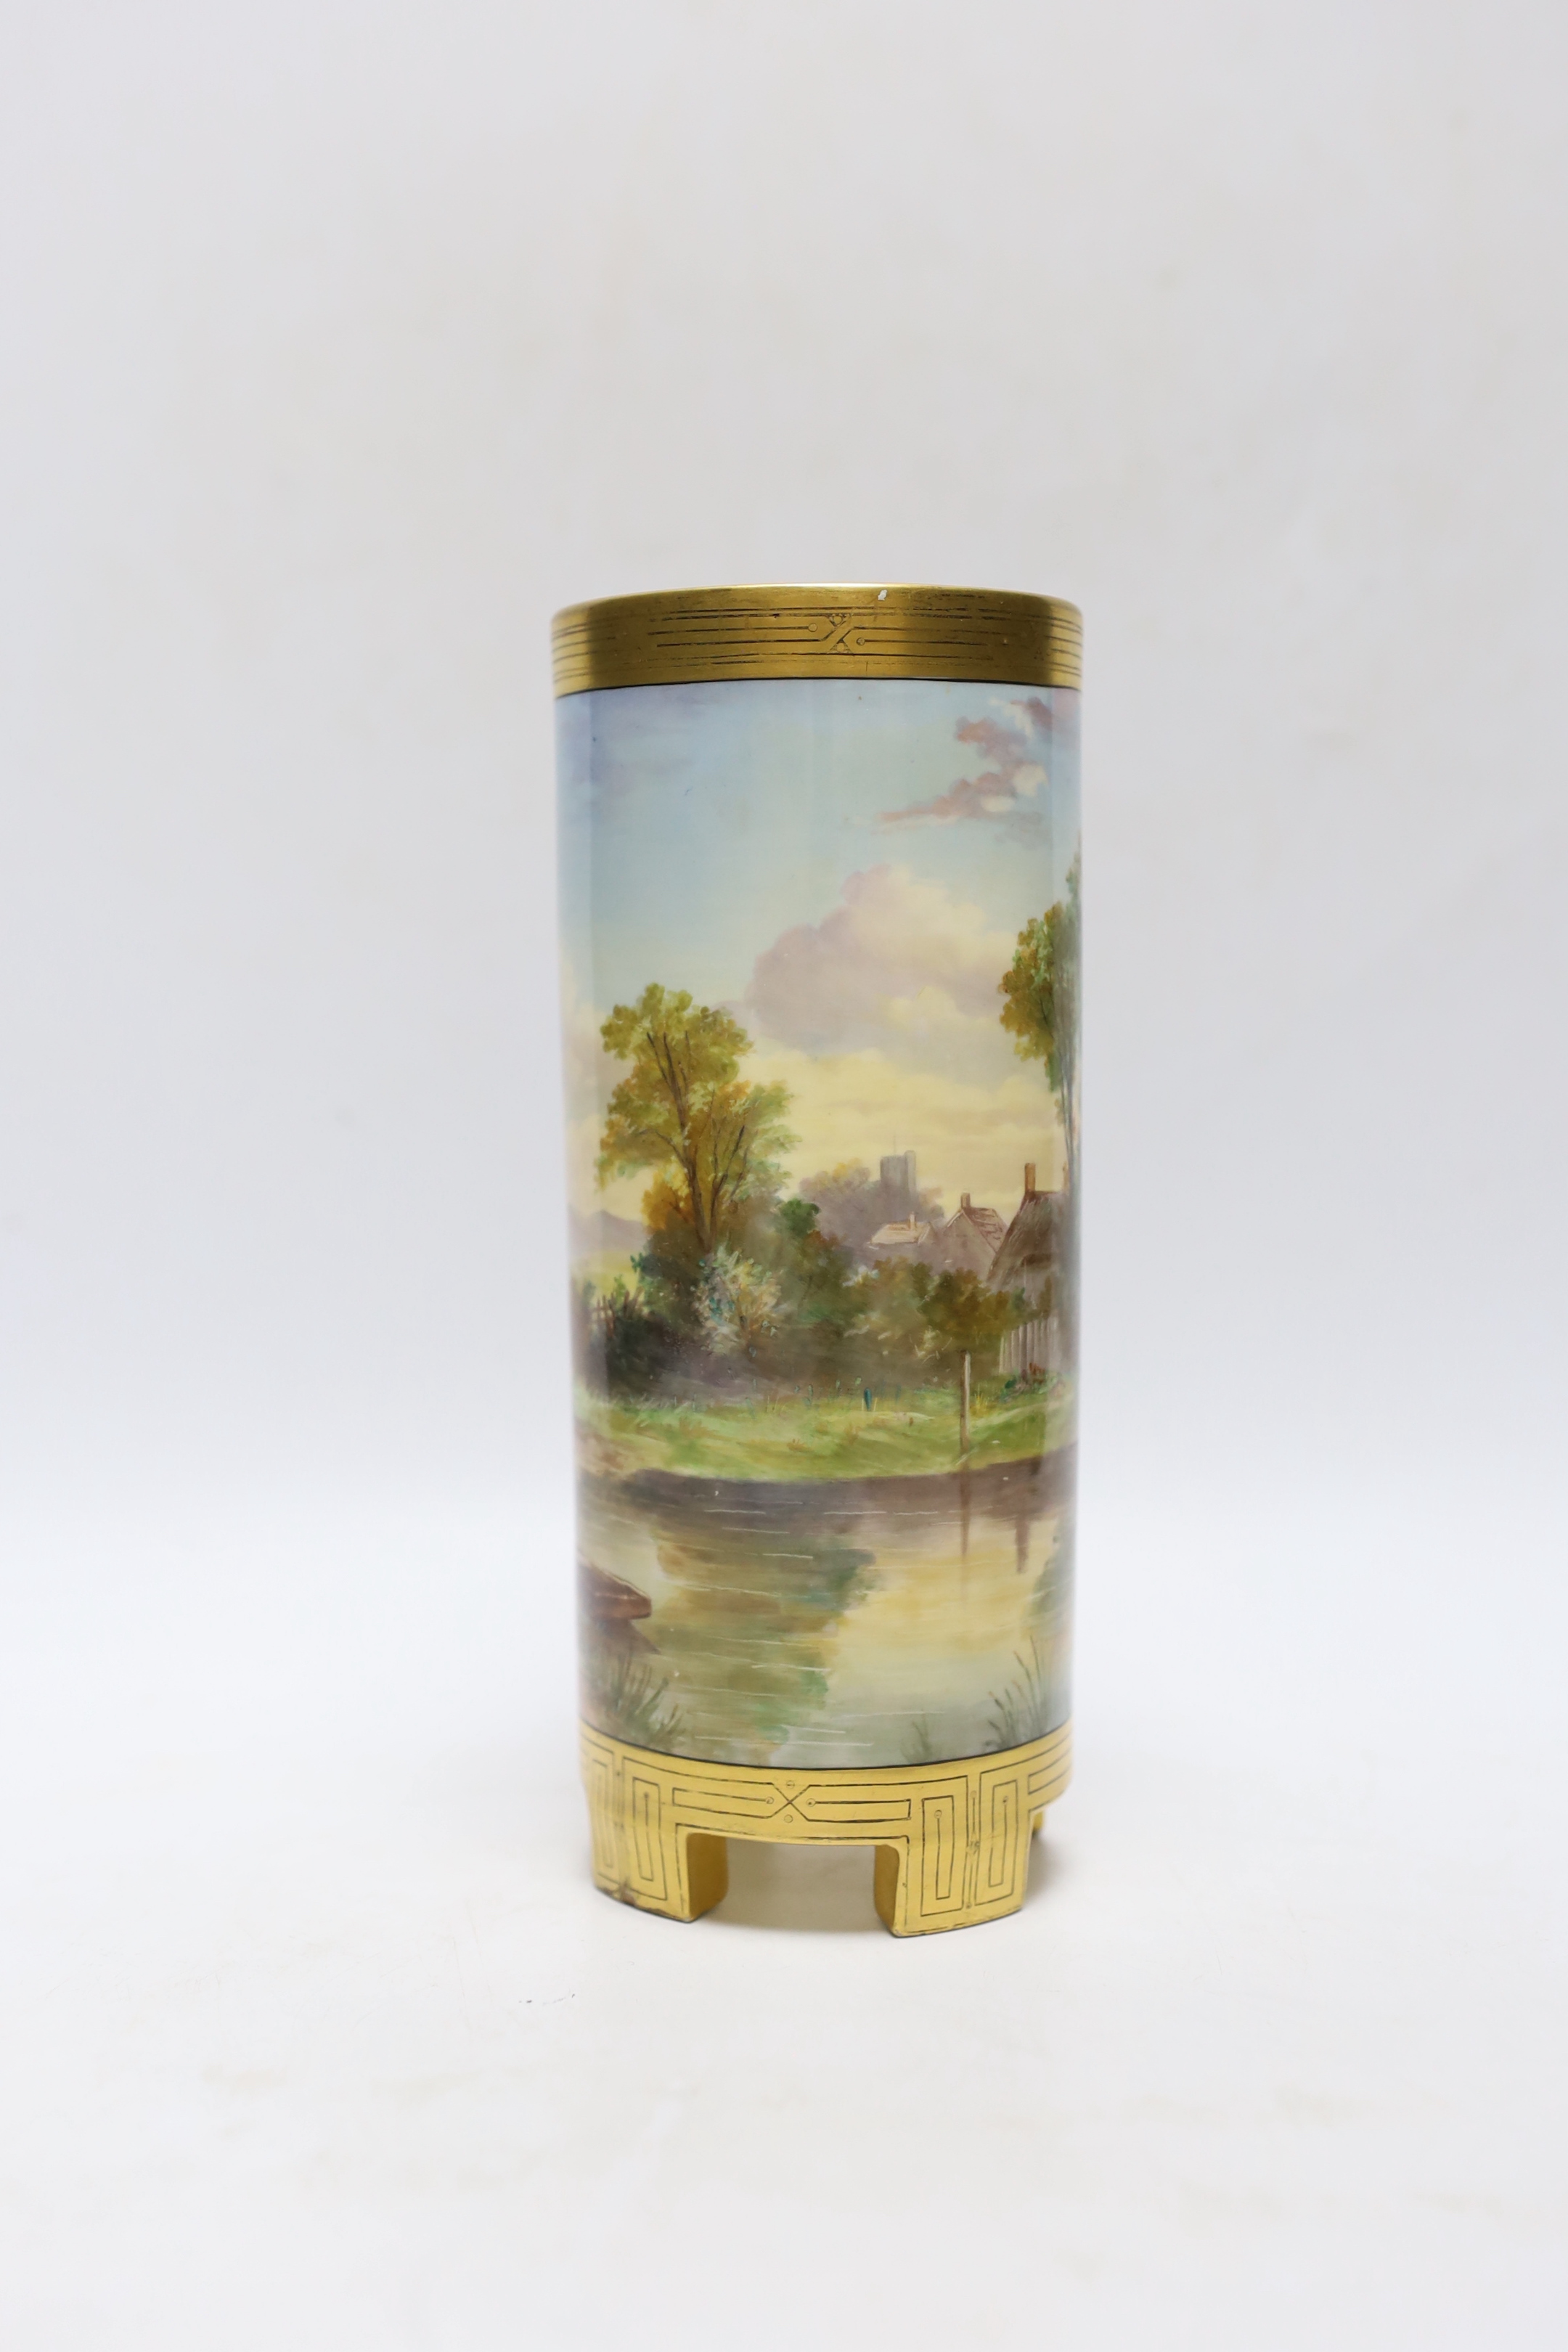 A Mintons porcelain cylinder vase, c.1880, painted with figures along a lakeside path with cottages, 20cm high